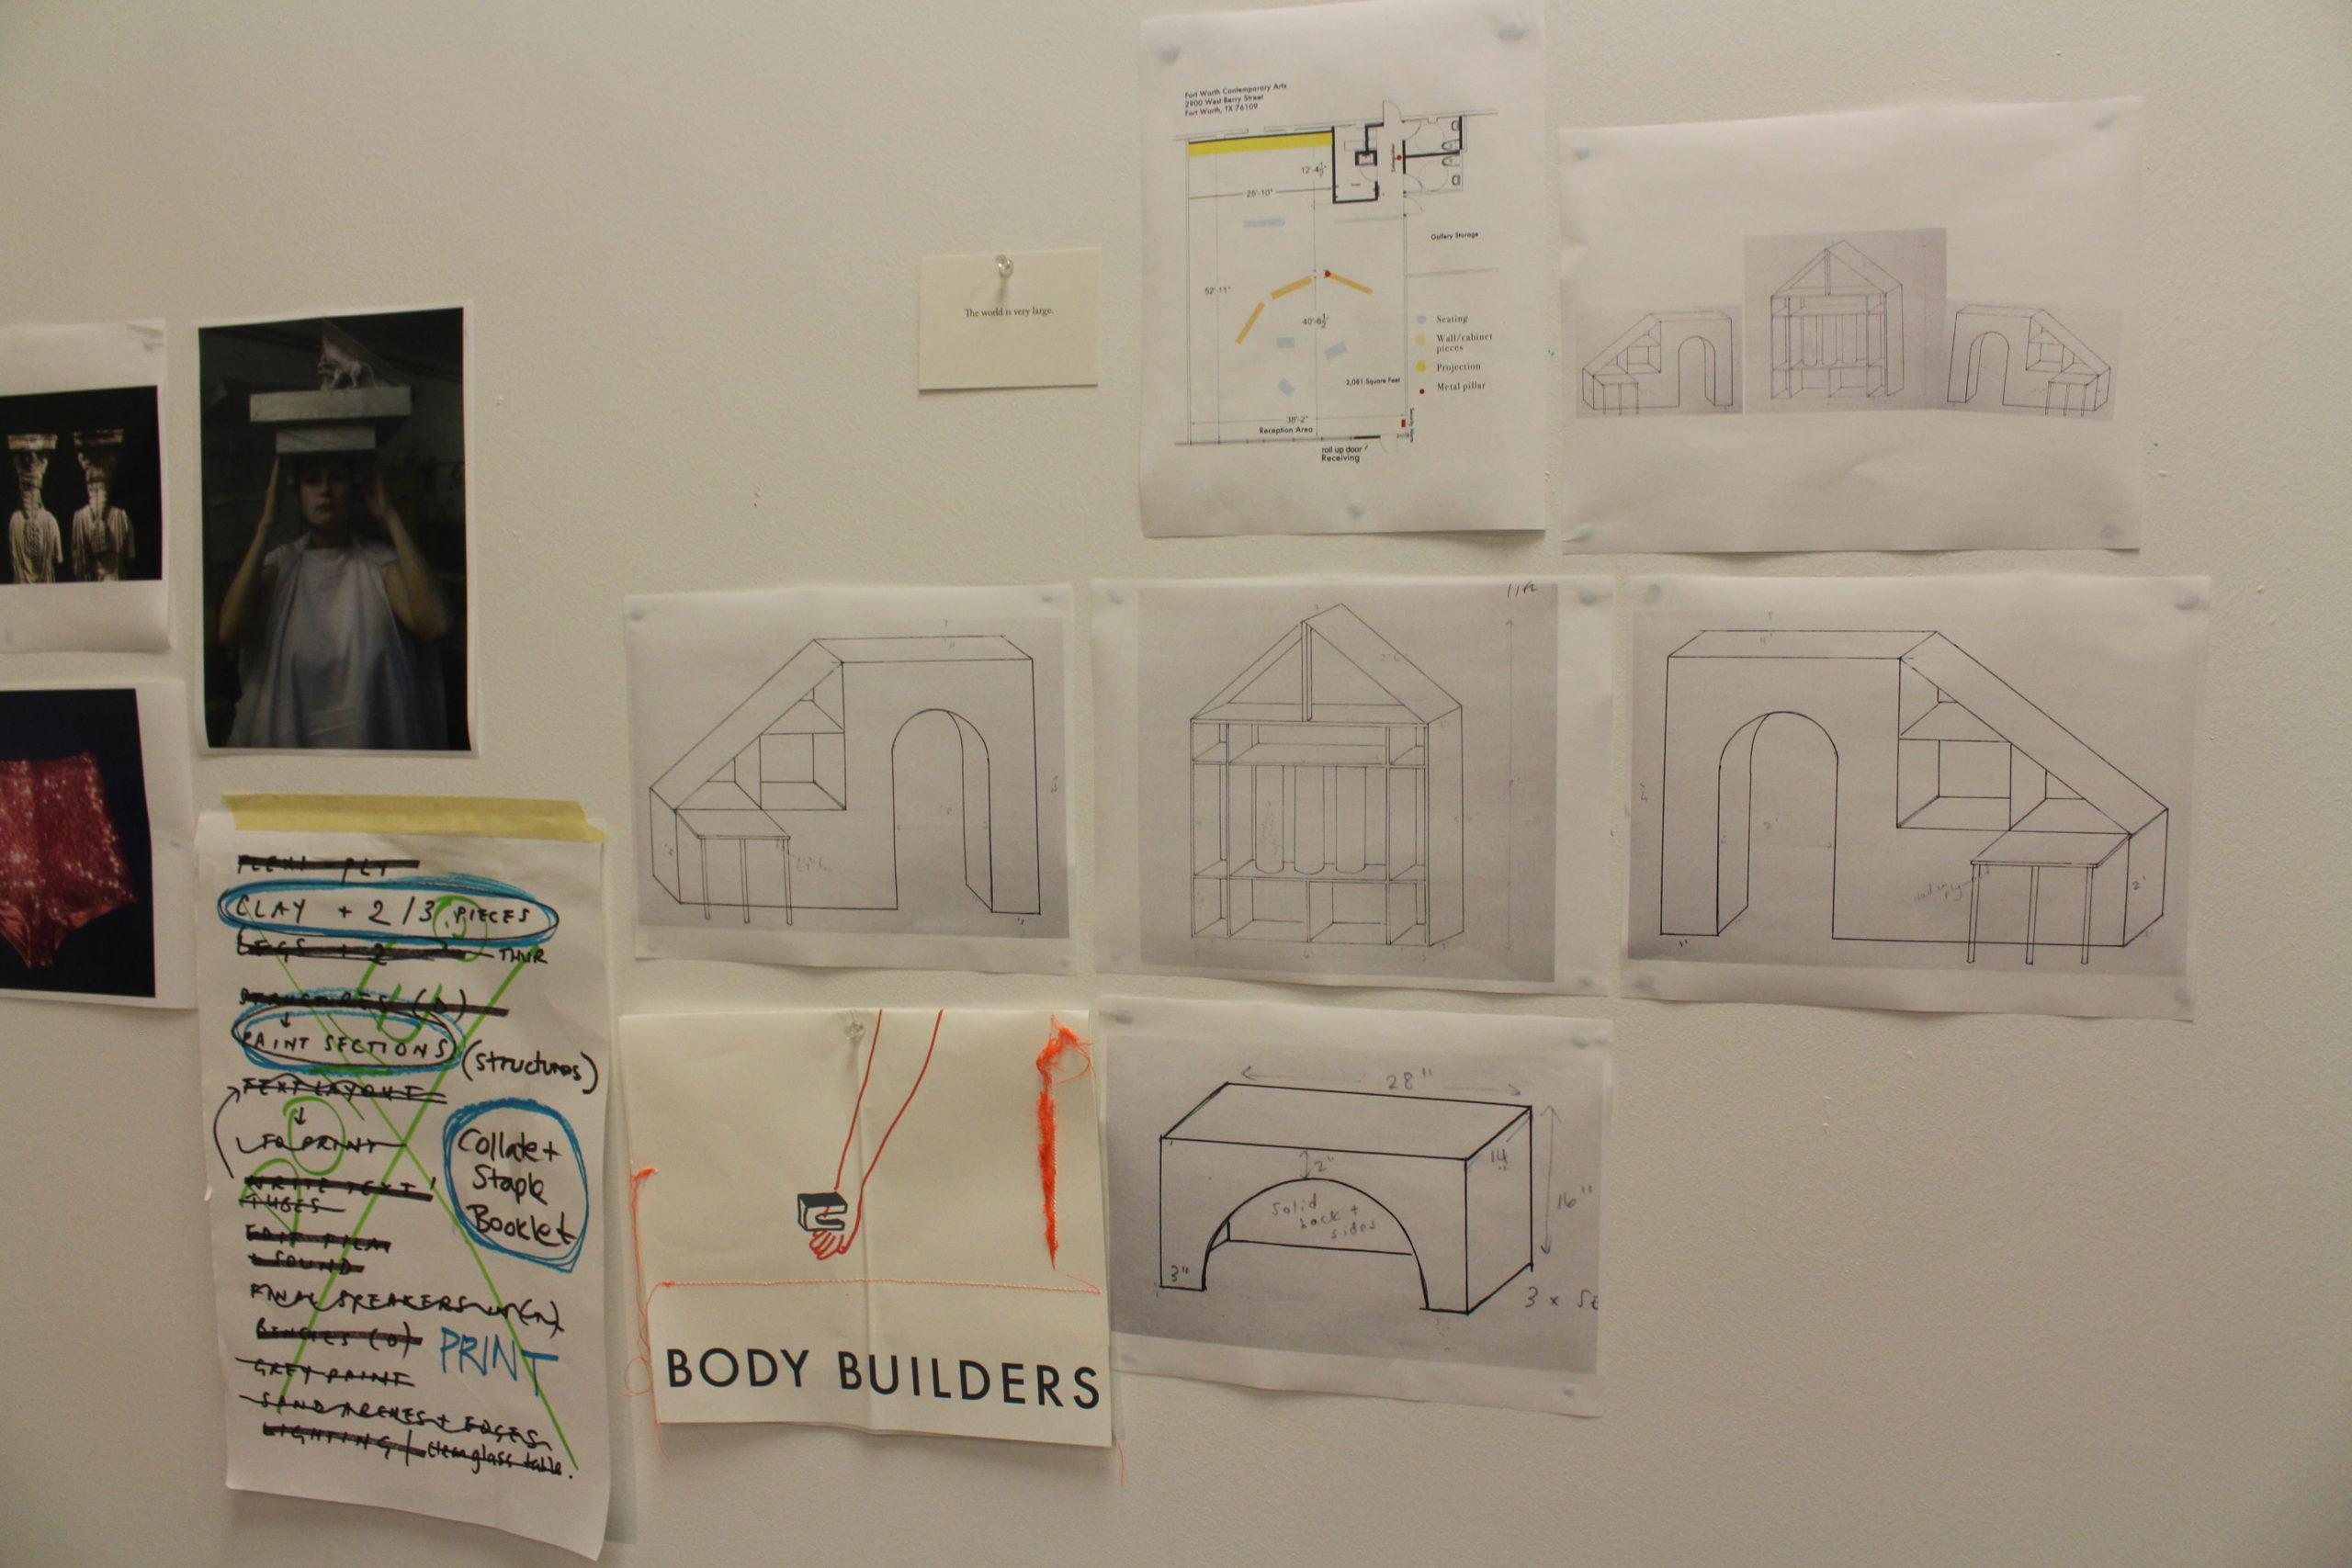 While planning the exhibition, Speed sent many drawings and ideas to Parsons. (Sam Bruton/TCU Staff Photographer)